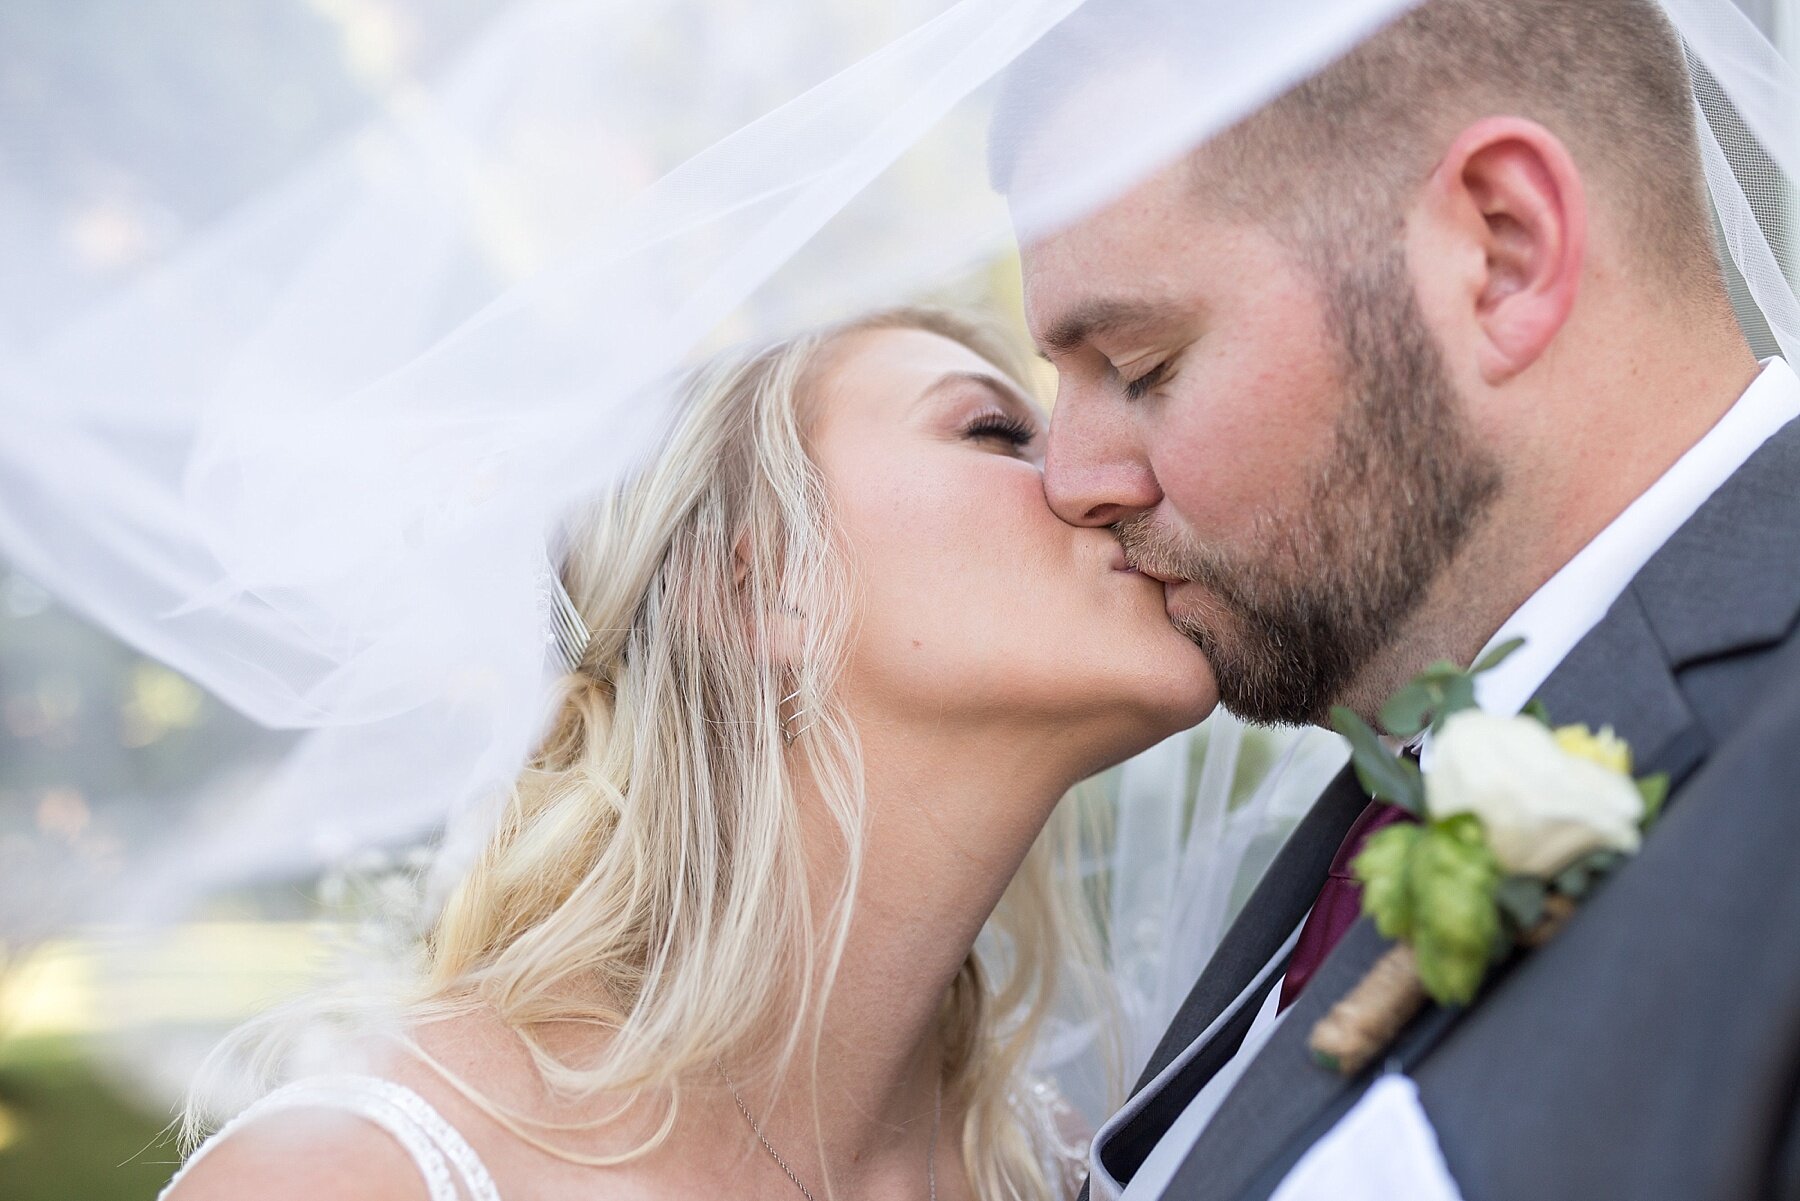 Wendy Zook Photography | Frederick MD wedding photographer, Maryland wedding photographer, wedding photography, tips to plan a better honeymoon, wedding planning tips, guest blog by Heather McKay